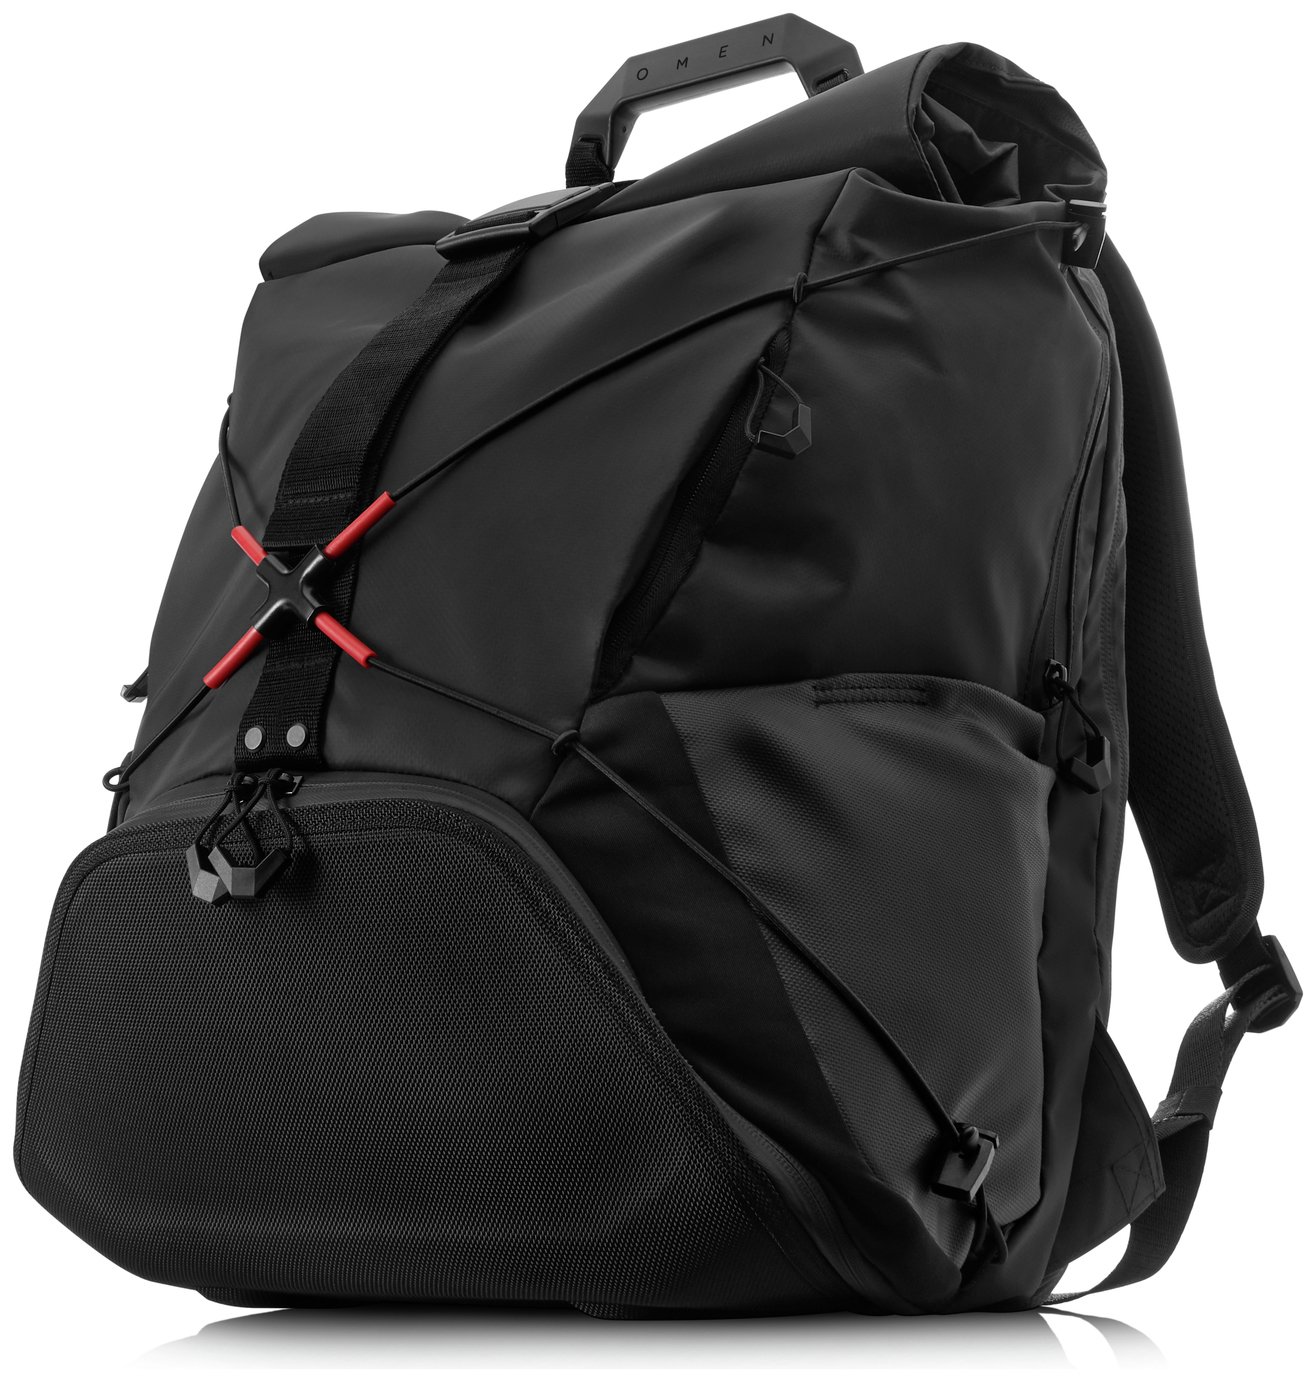 HP Omen X 17.3 Inch Laptop Backpack Reviews